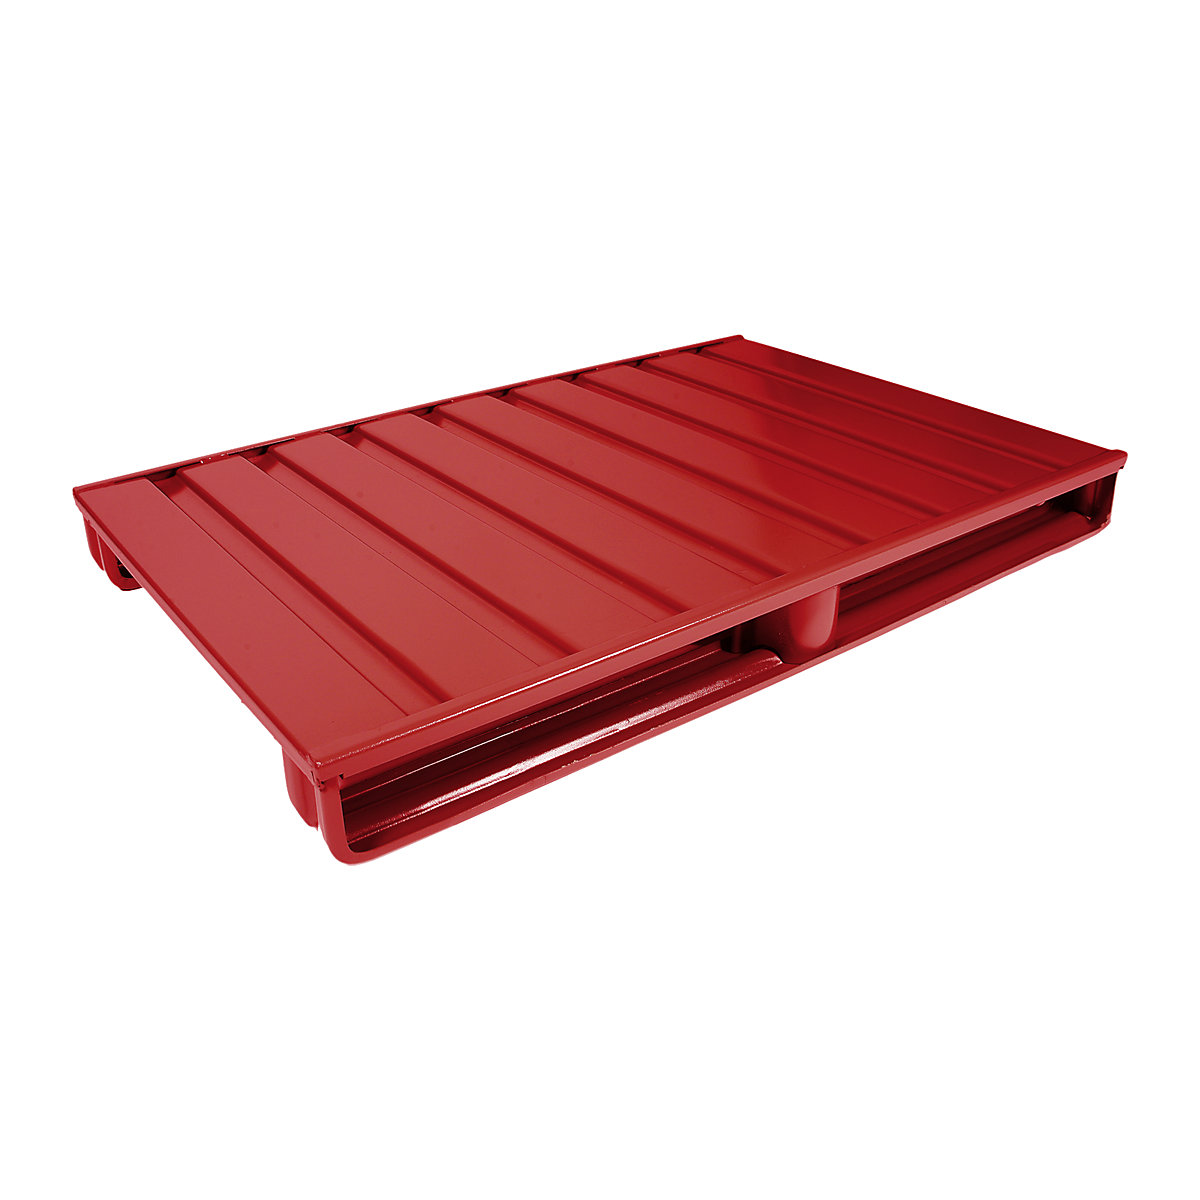 Flat steel pallet – Heson, LxW 1200 x 1000 mm, max. load 1500 kg, flame red, 10+ items-2